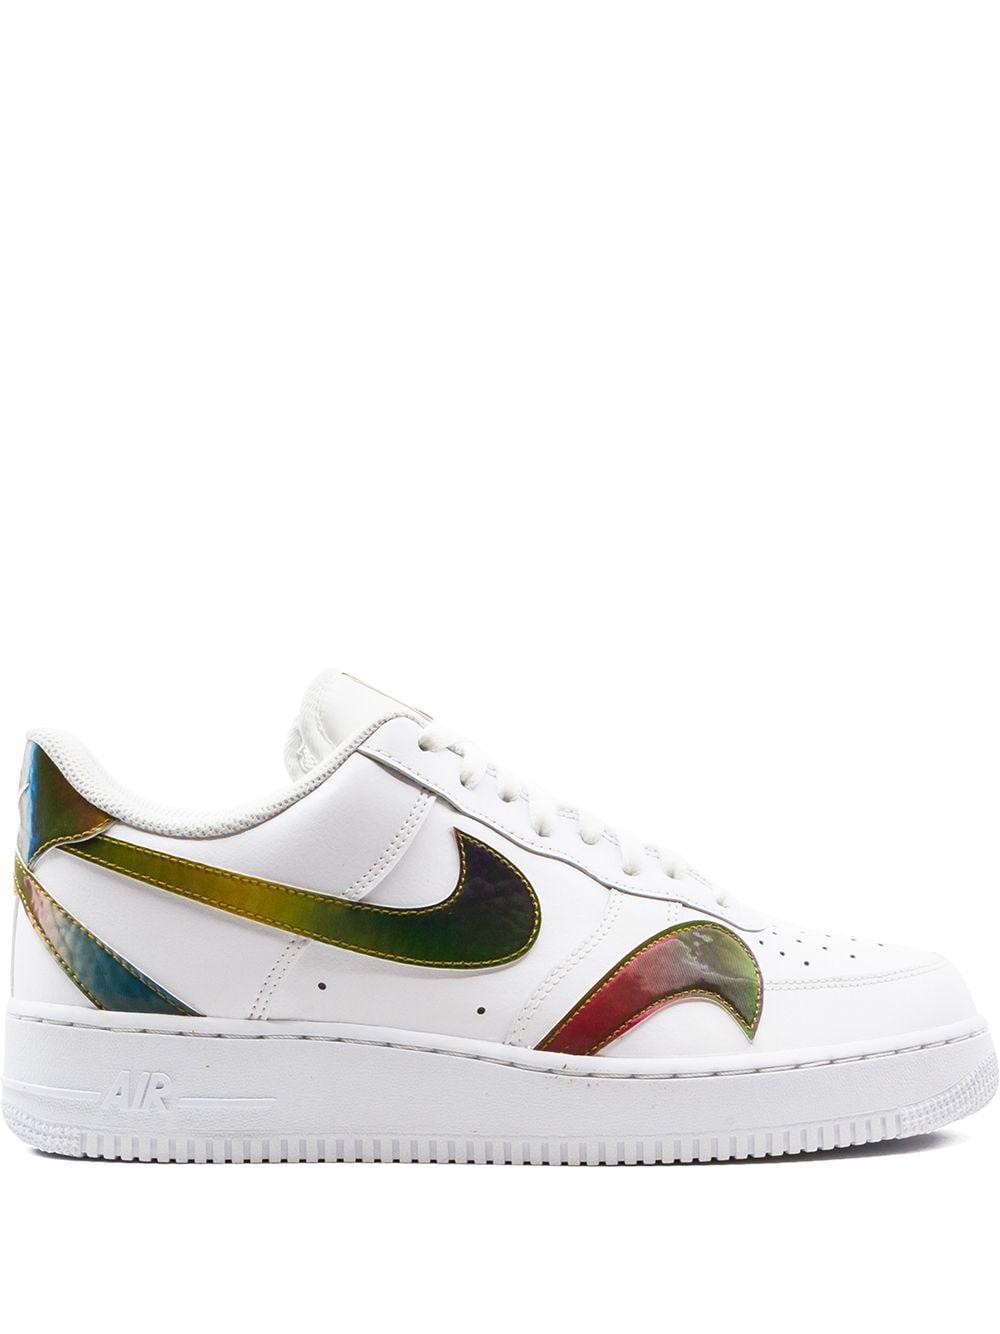 Nike Air Force 1 '07 LV8 "Misplaced Swoosh" sneakers - White von Nike